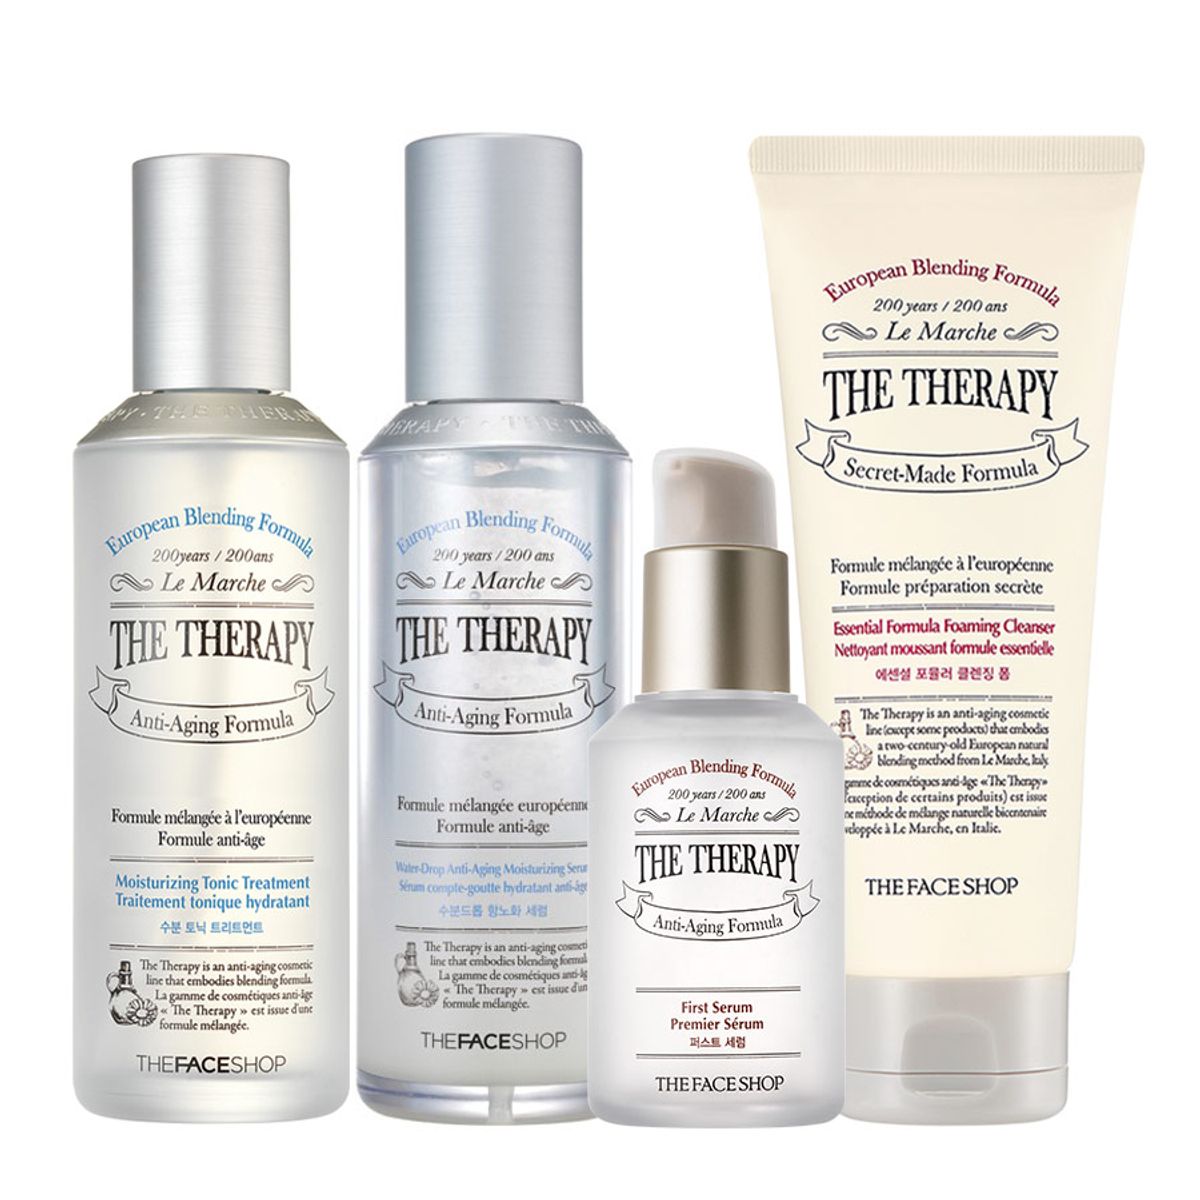 bo-cham-soc-da-therapy-toner-serum-foaming-cleanser-the-therapy-first-serum-1